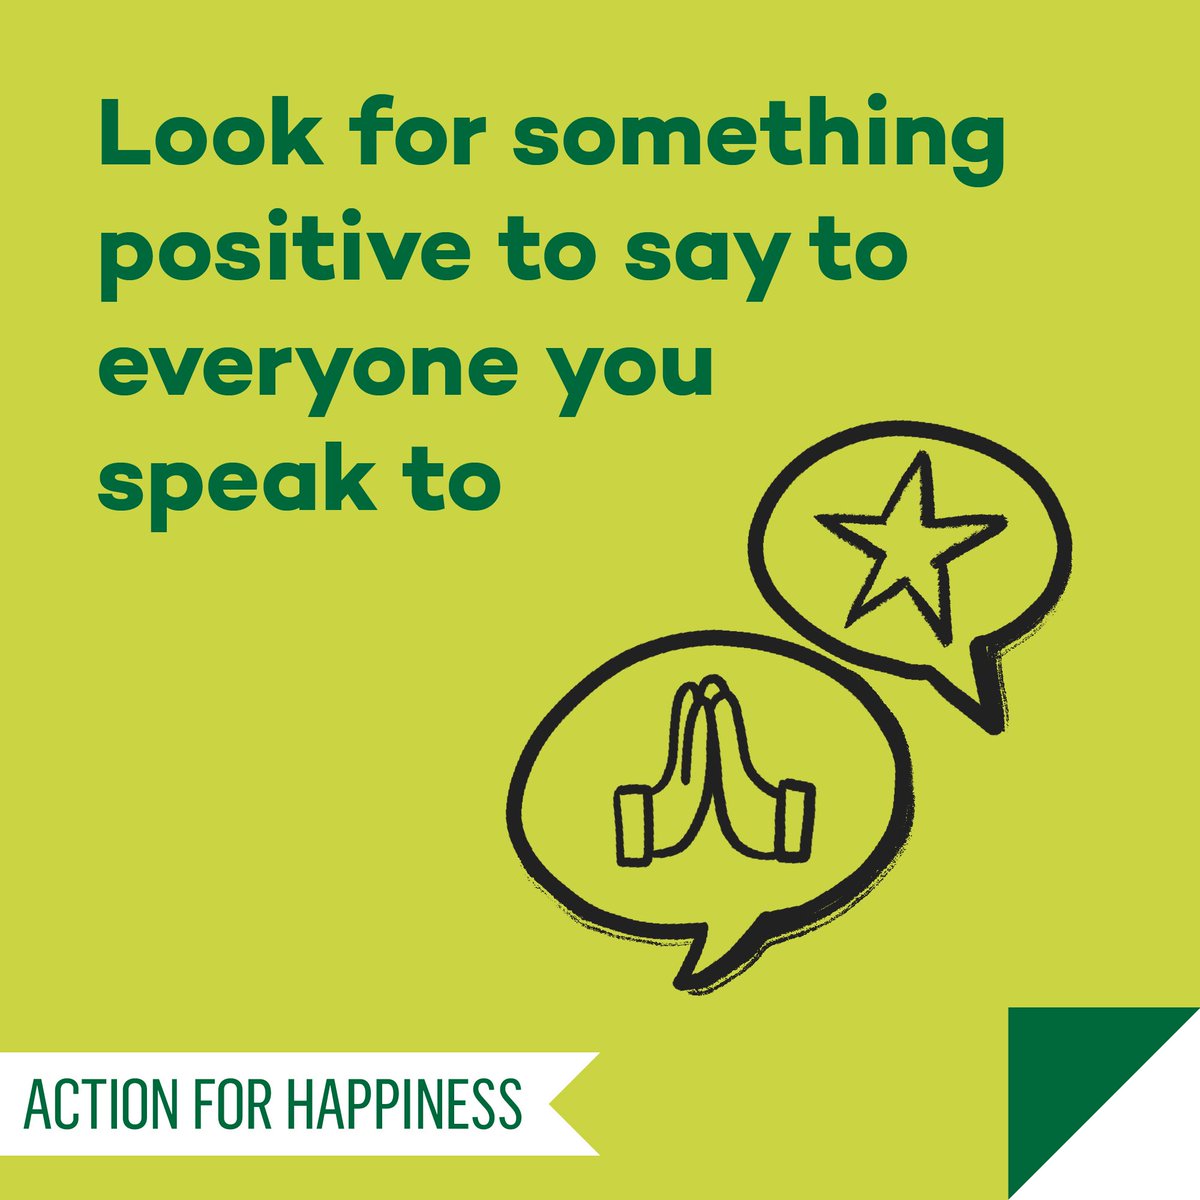 Do Good December - Day 16: Look for something positive to say to everyone you speak to actionforhappiness.org/do-good-decemb… #DoGoodDecember